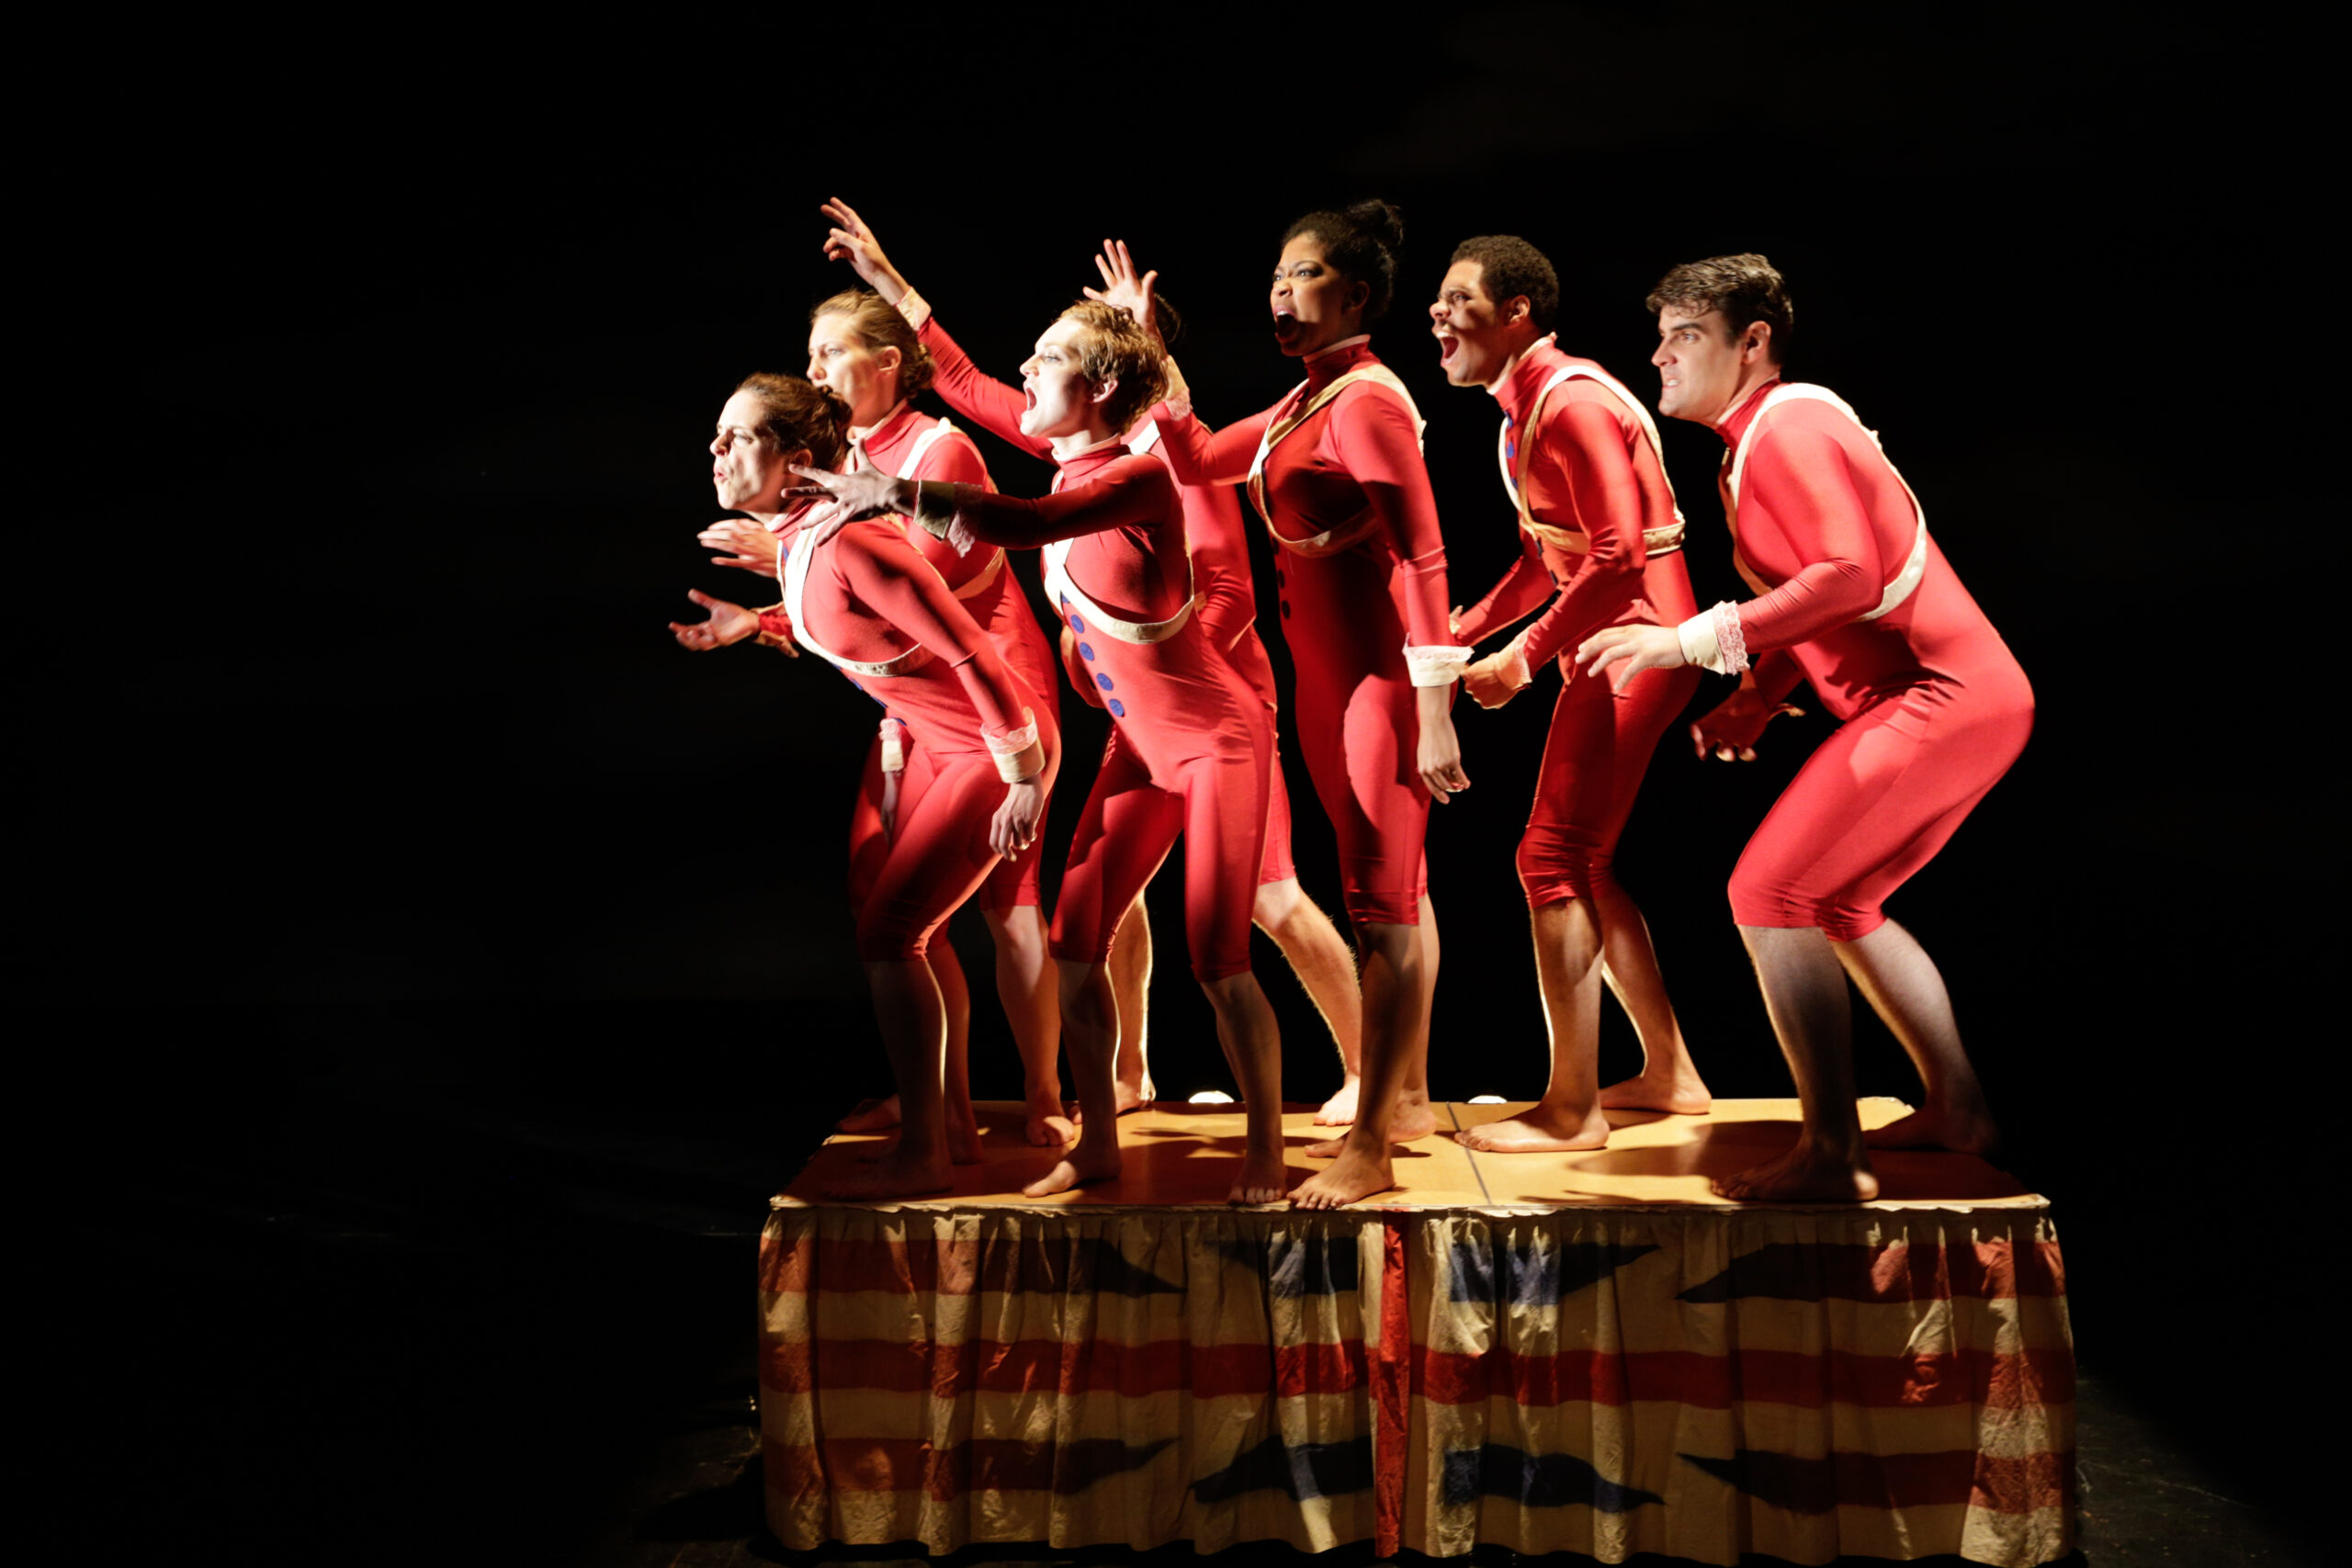 6 Actors dressed in red leotards, standing on a platform. They are all facing the left and crouching down.